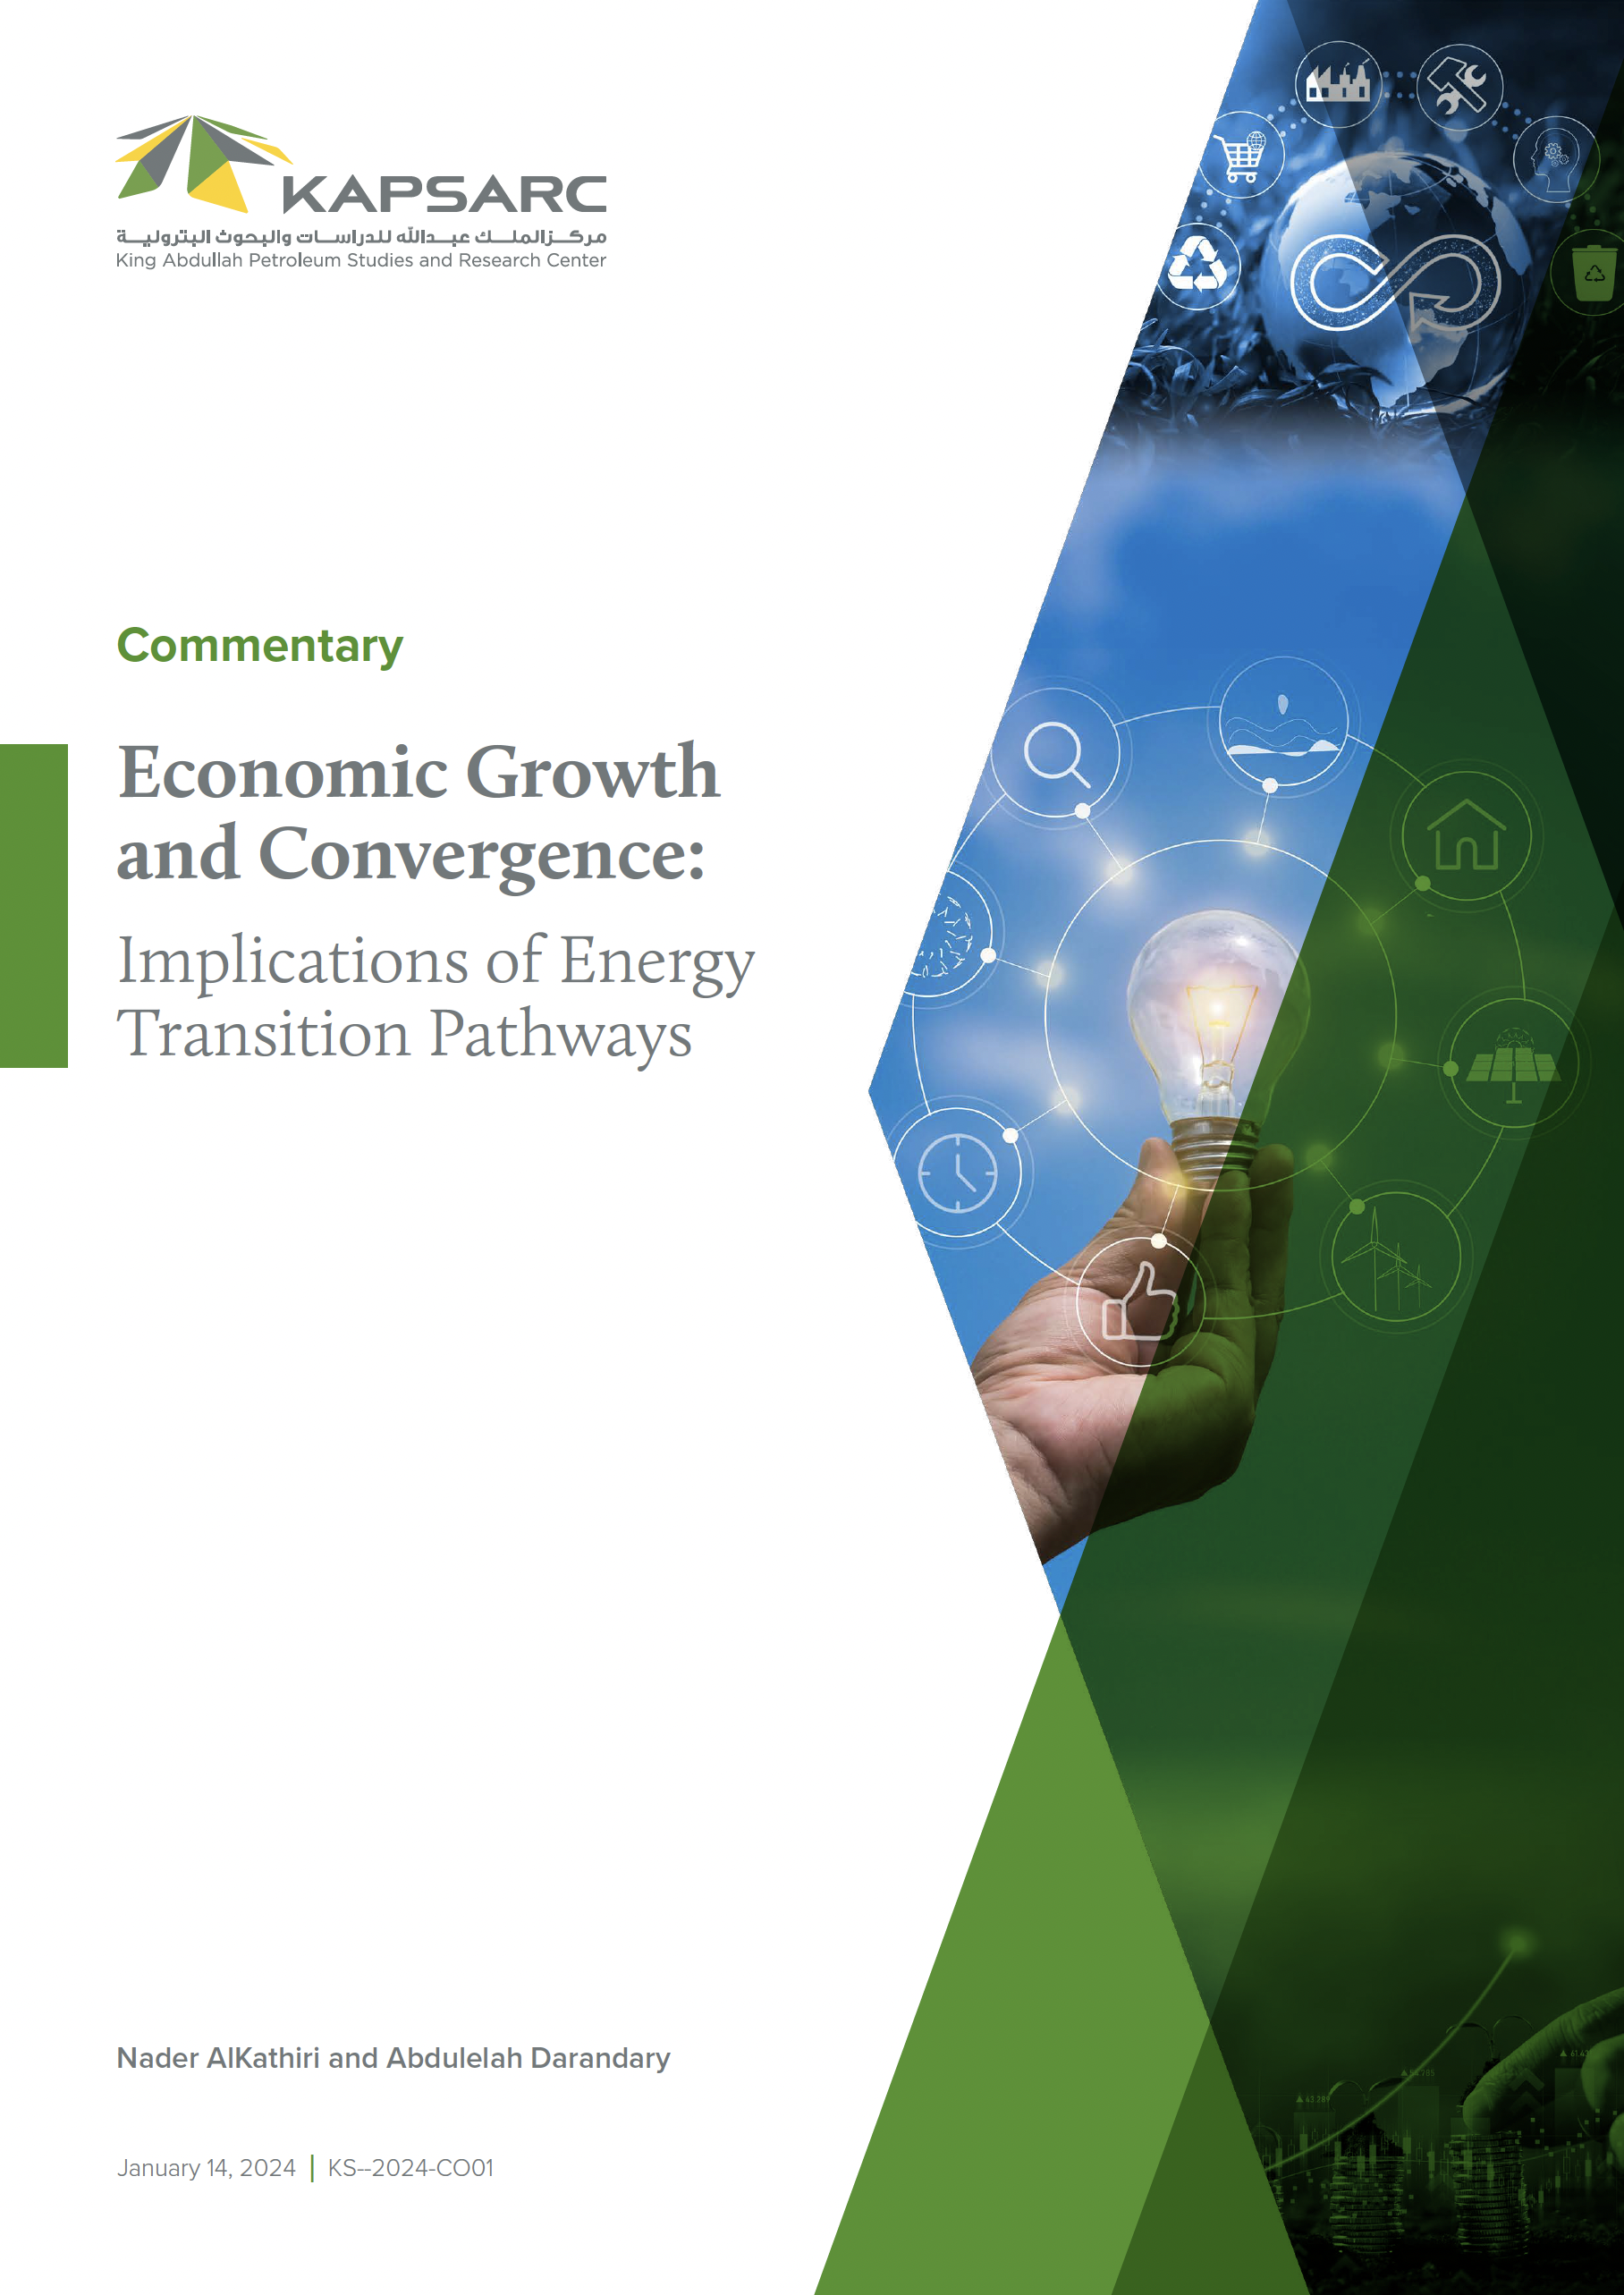 Economic Growth and Convergence: Implications of Energy Transition Pathways